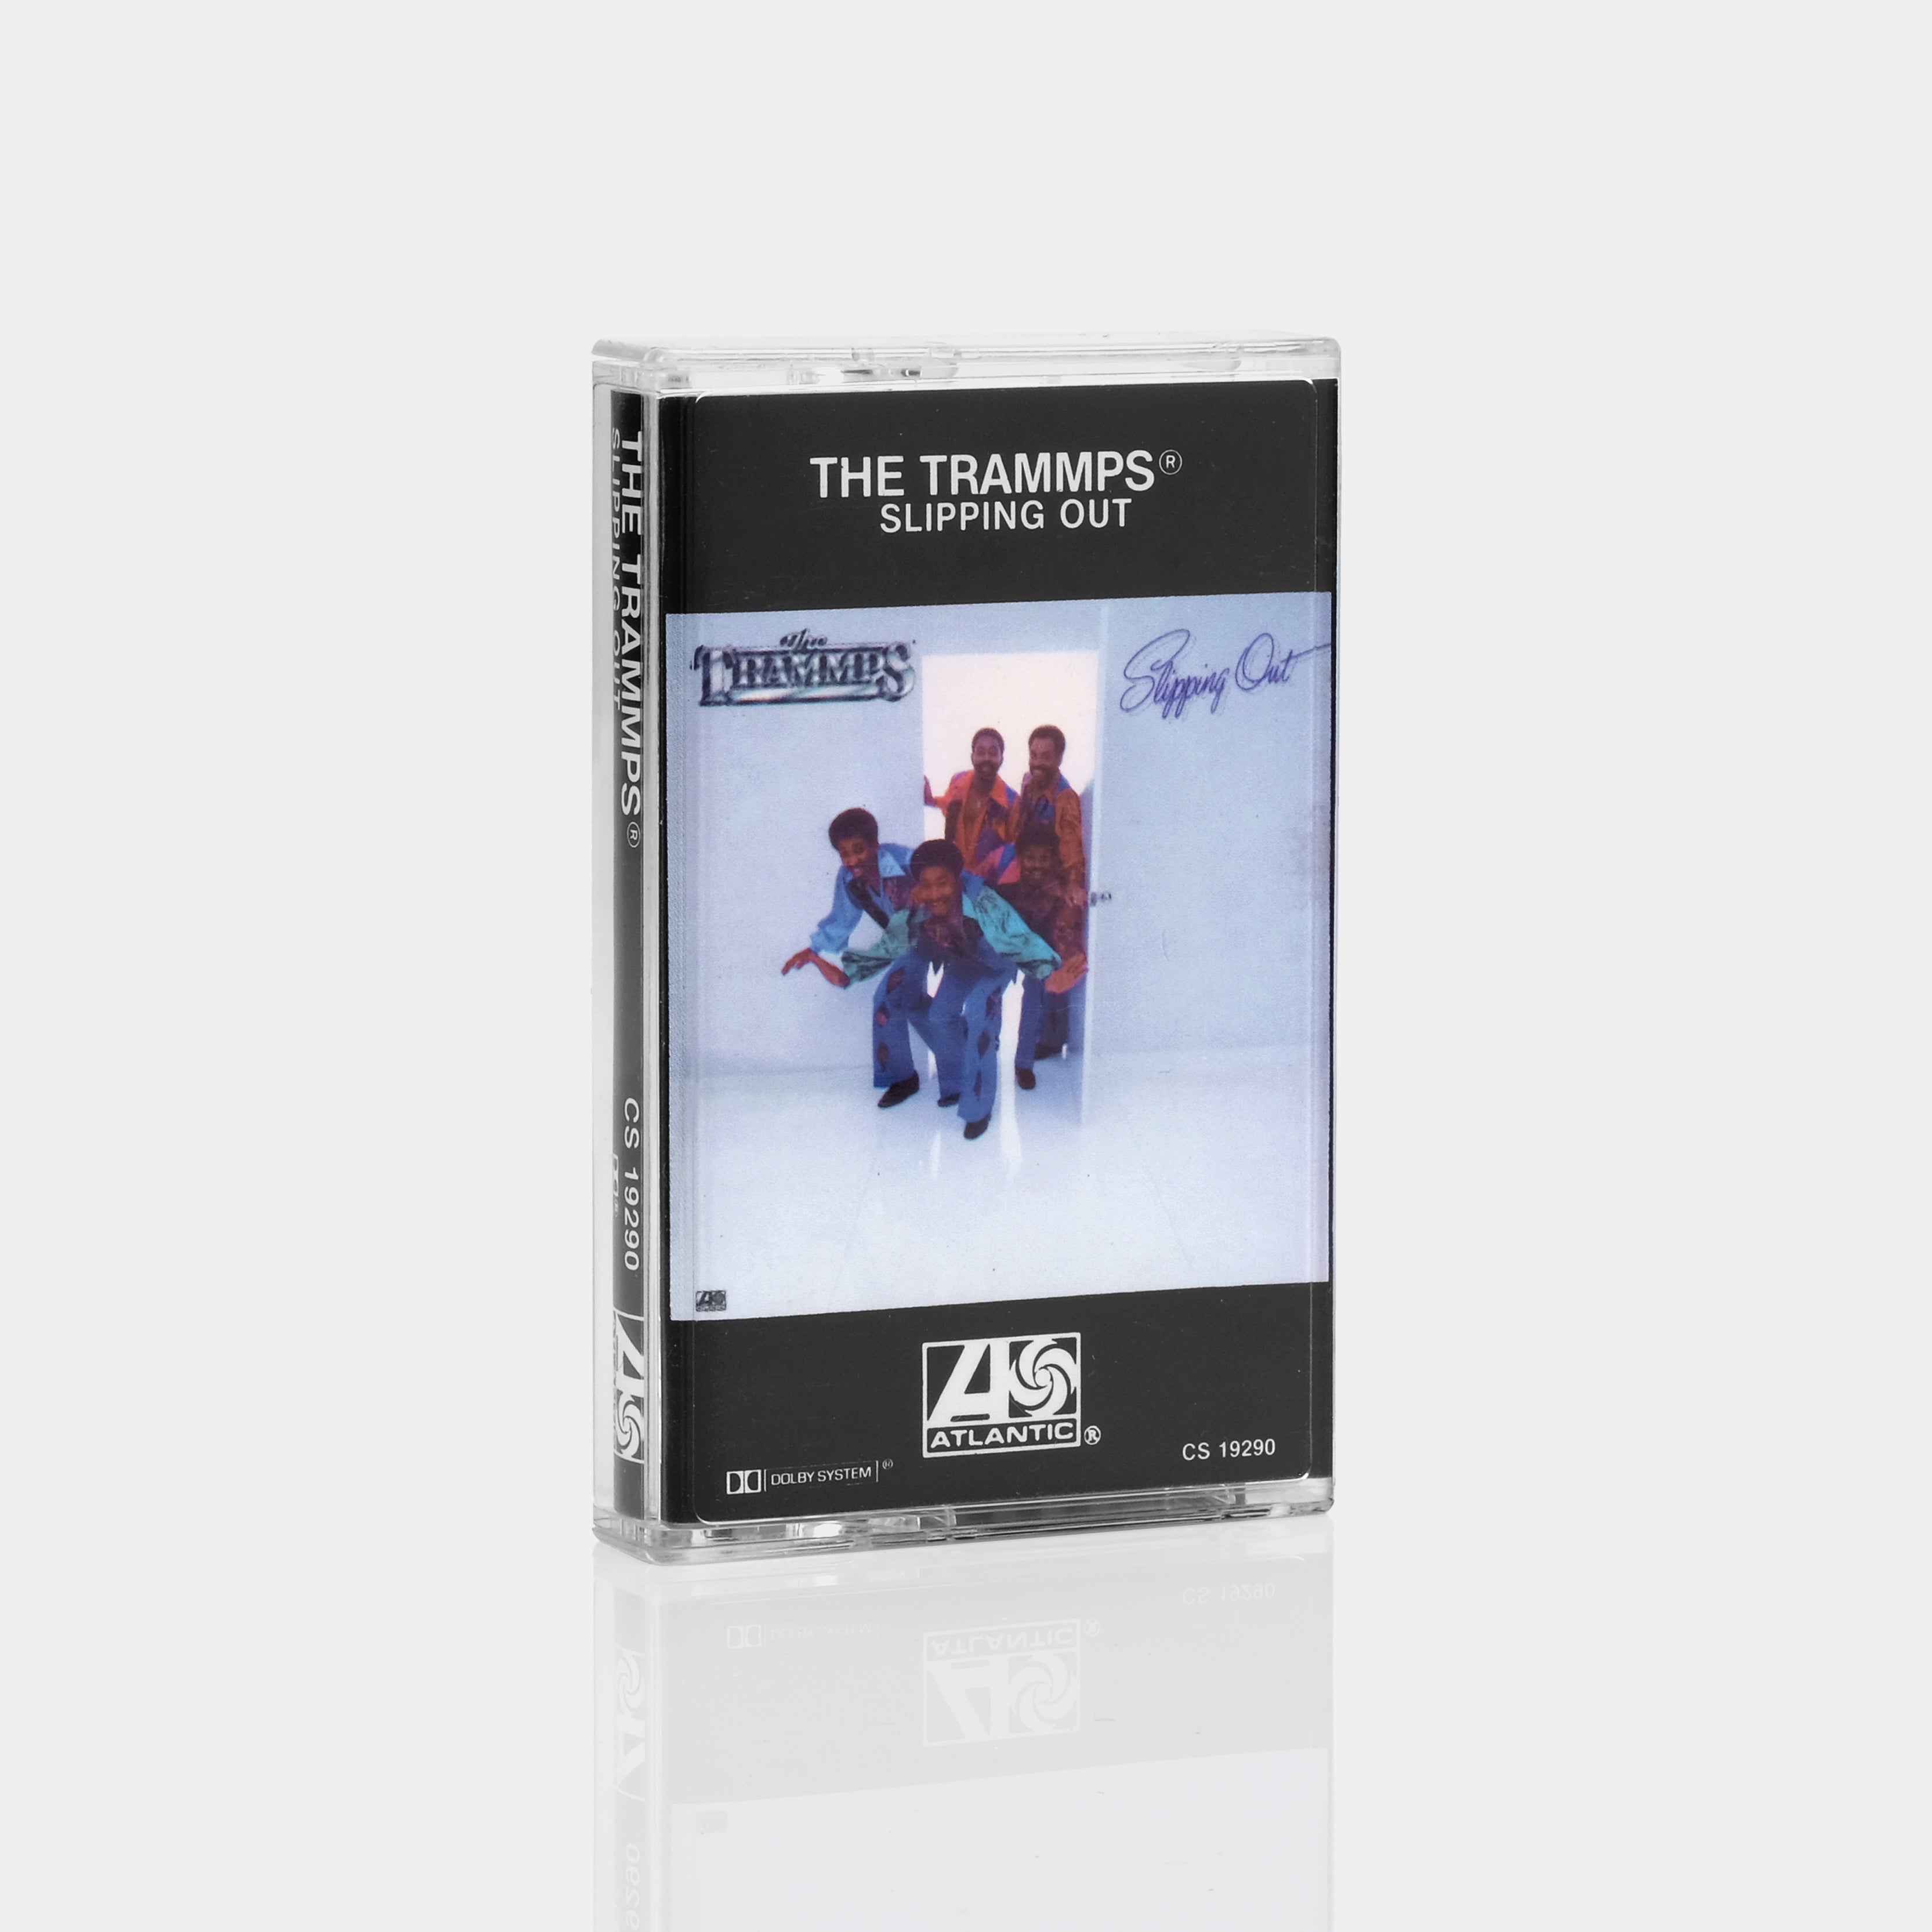 The Trammps - Slipping Out Cassette Tape